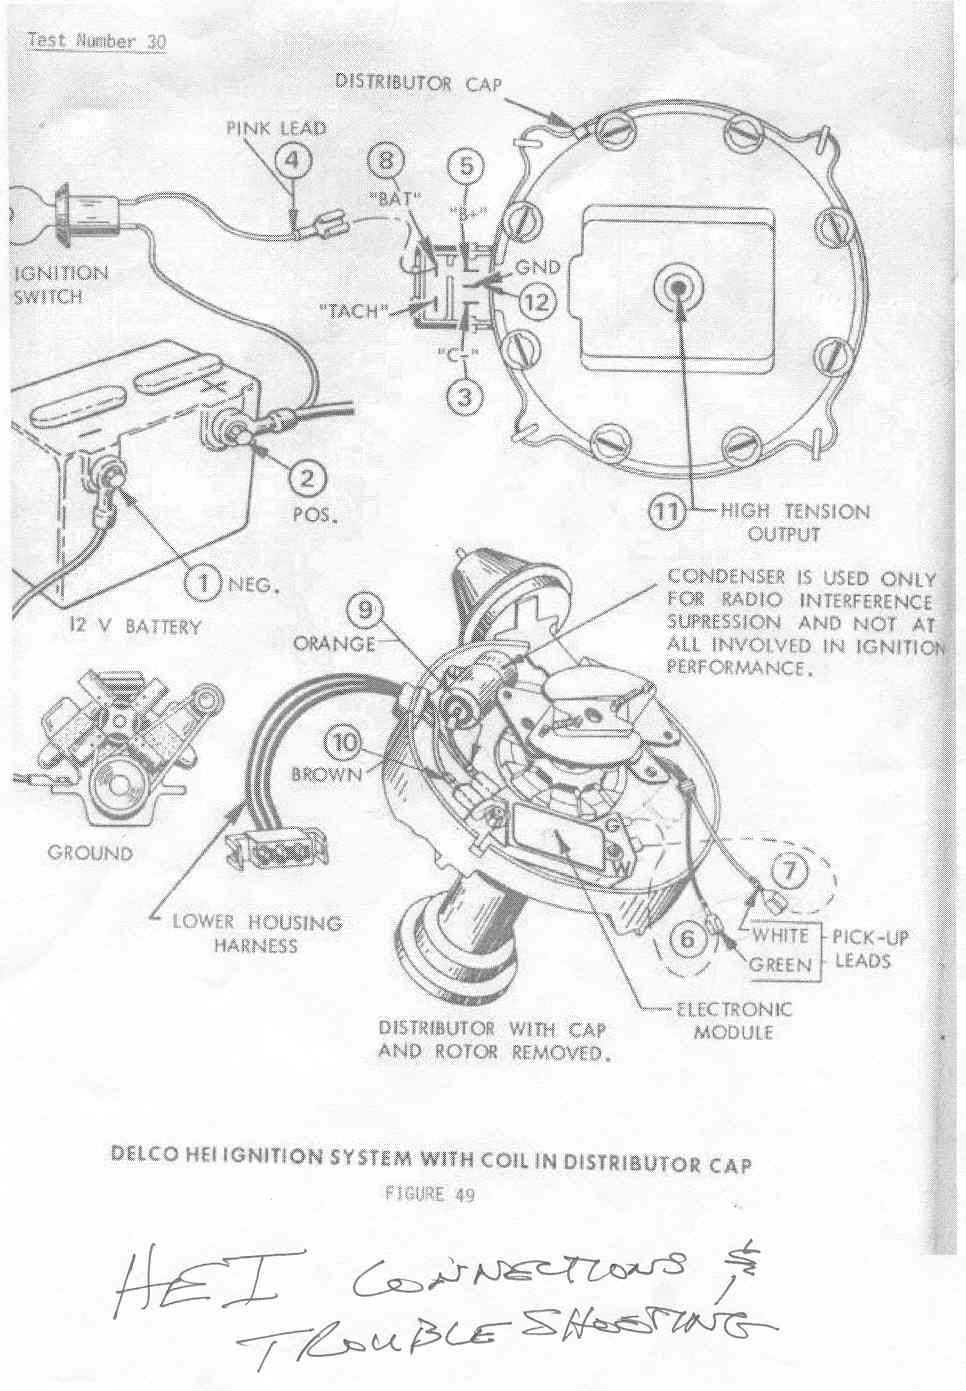 What Is The Wiring Diagram For Chevy 350 Distributor Cap | schematic